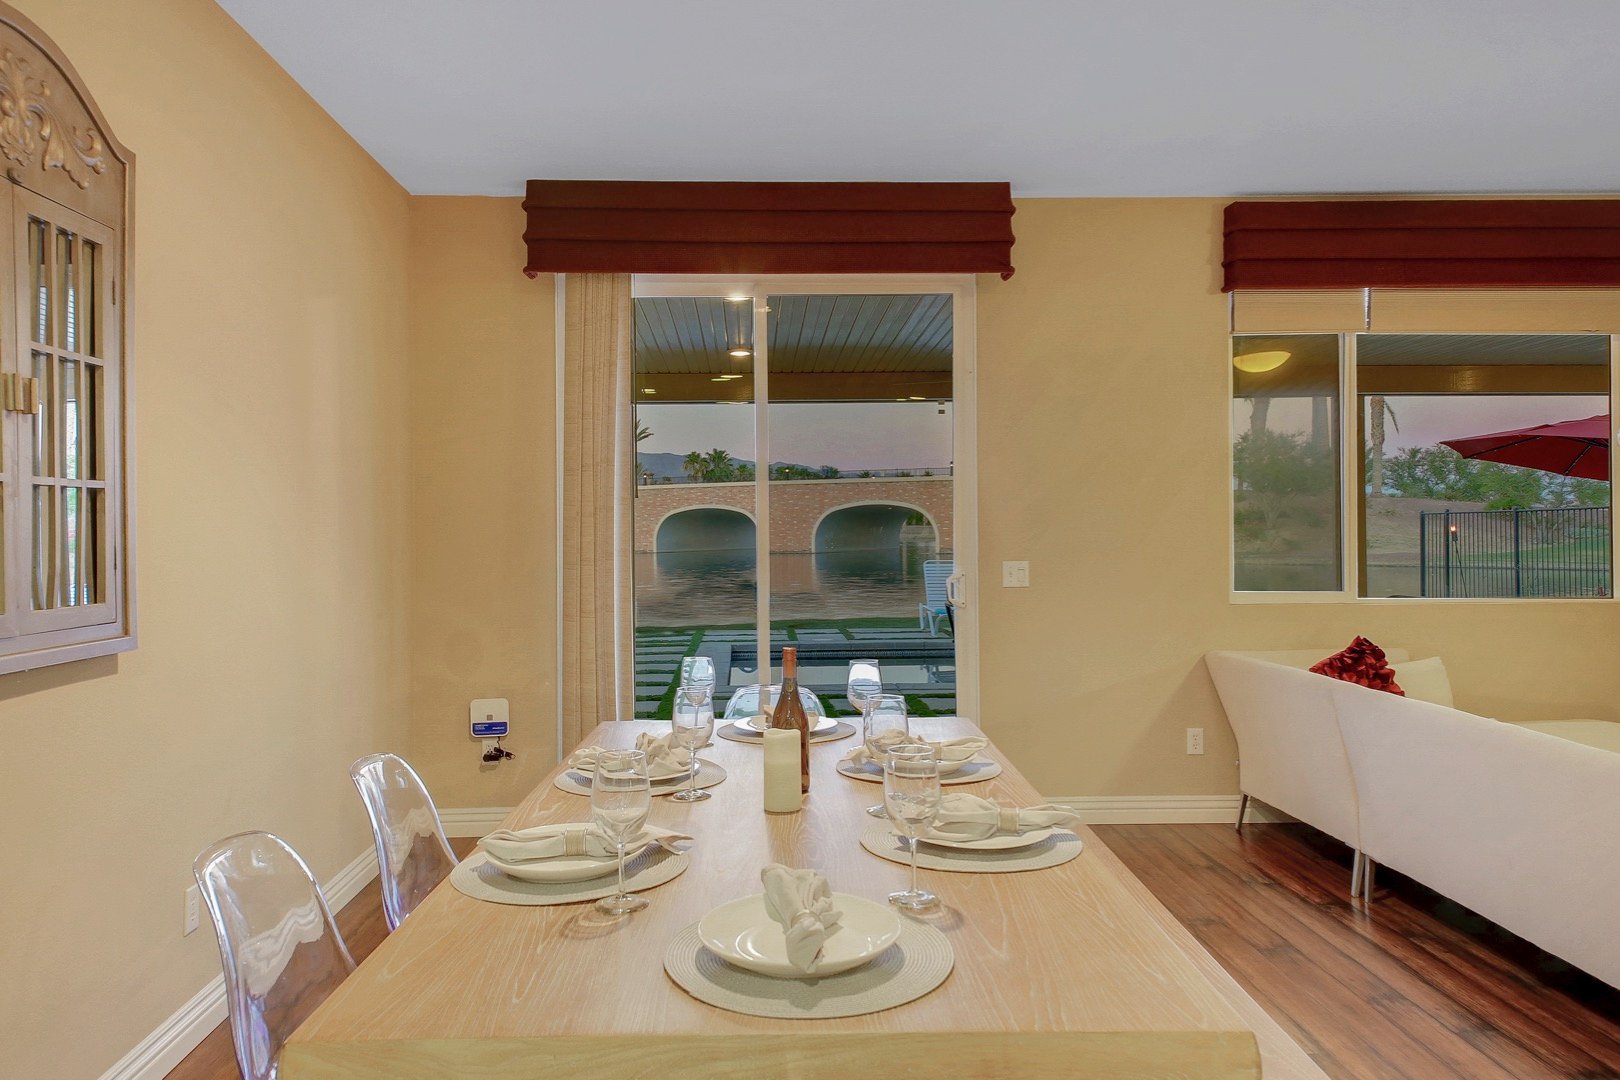 Have a toast to Great Views at the formal dining table